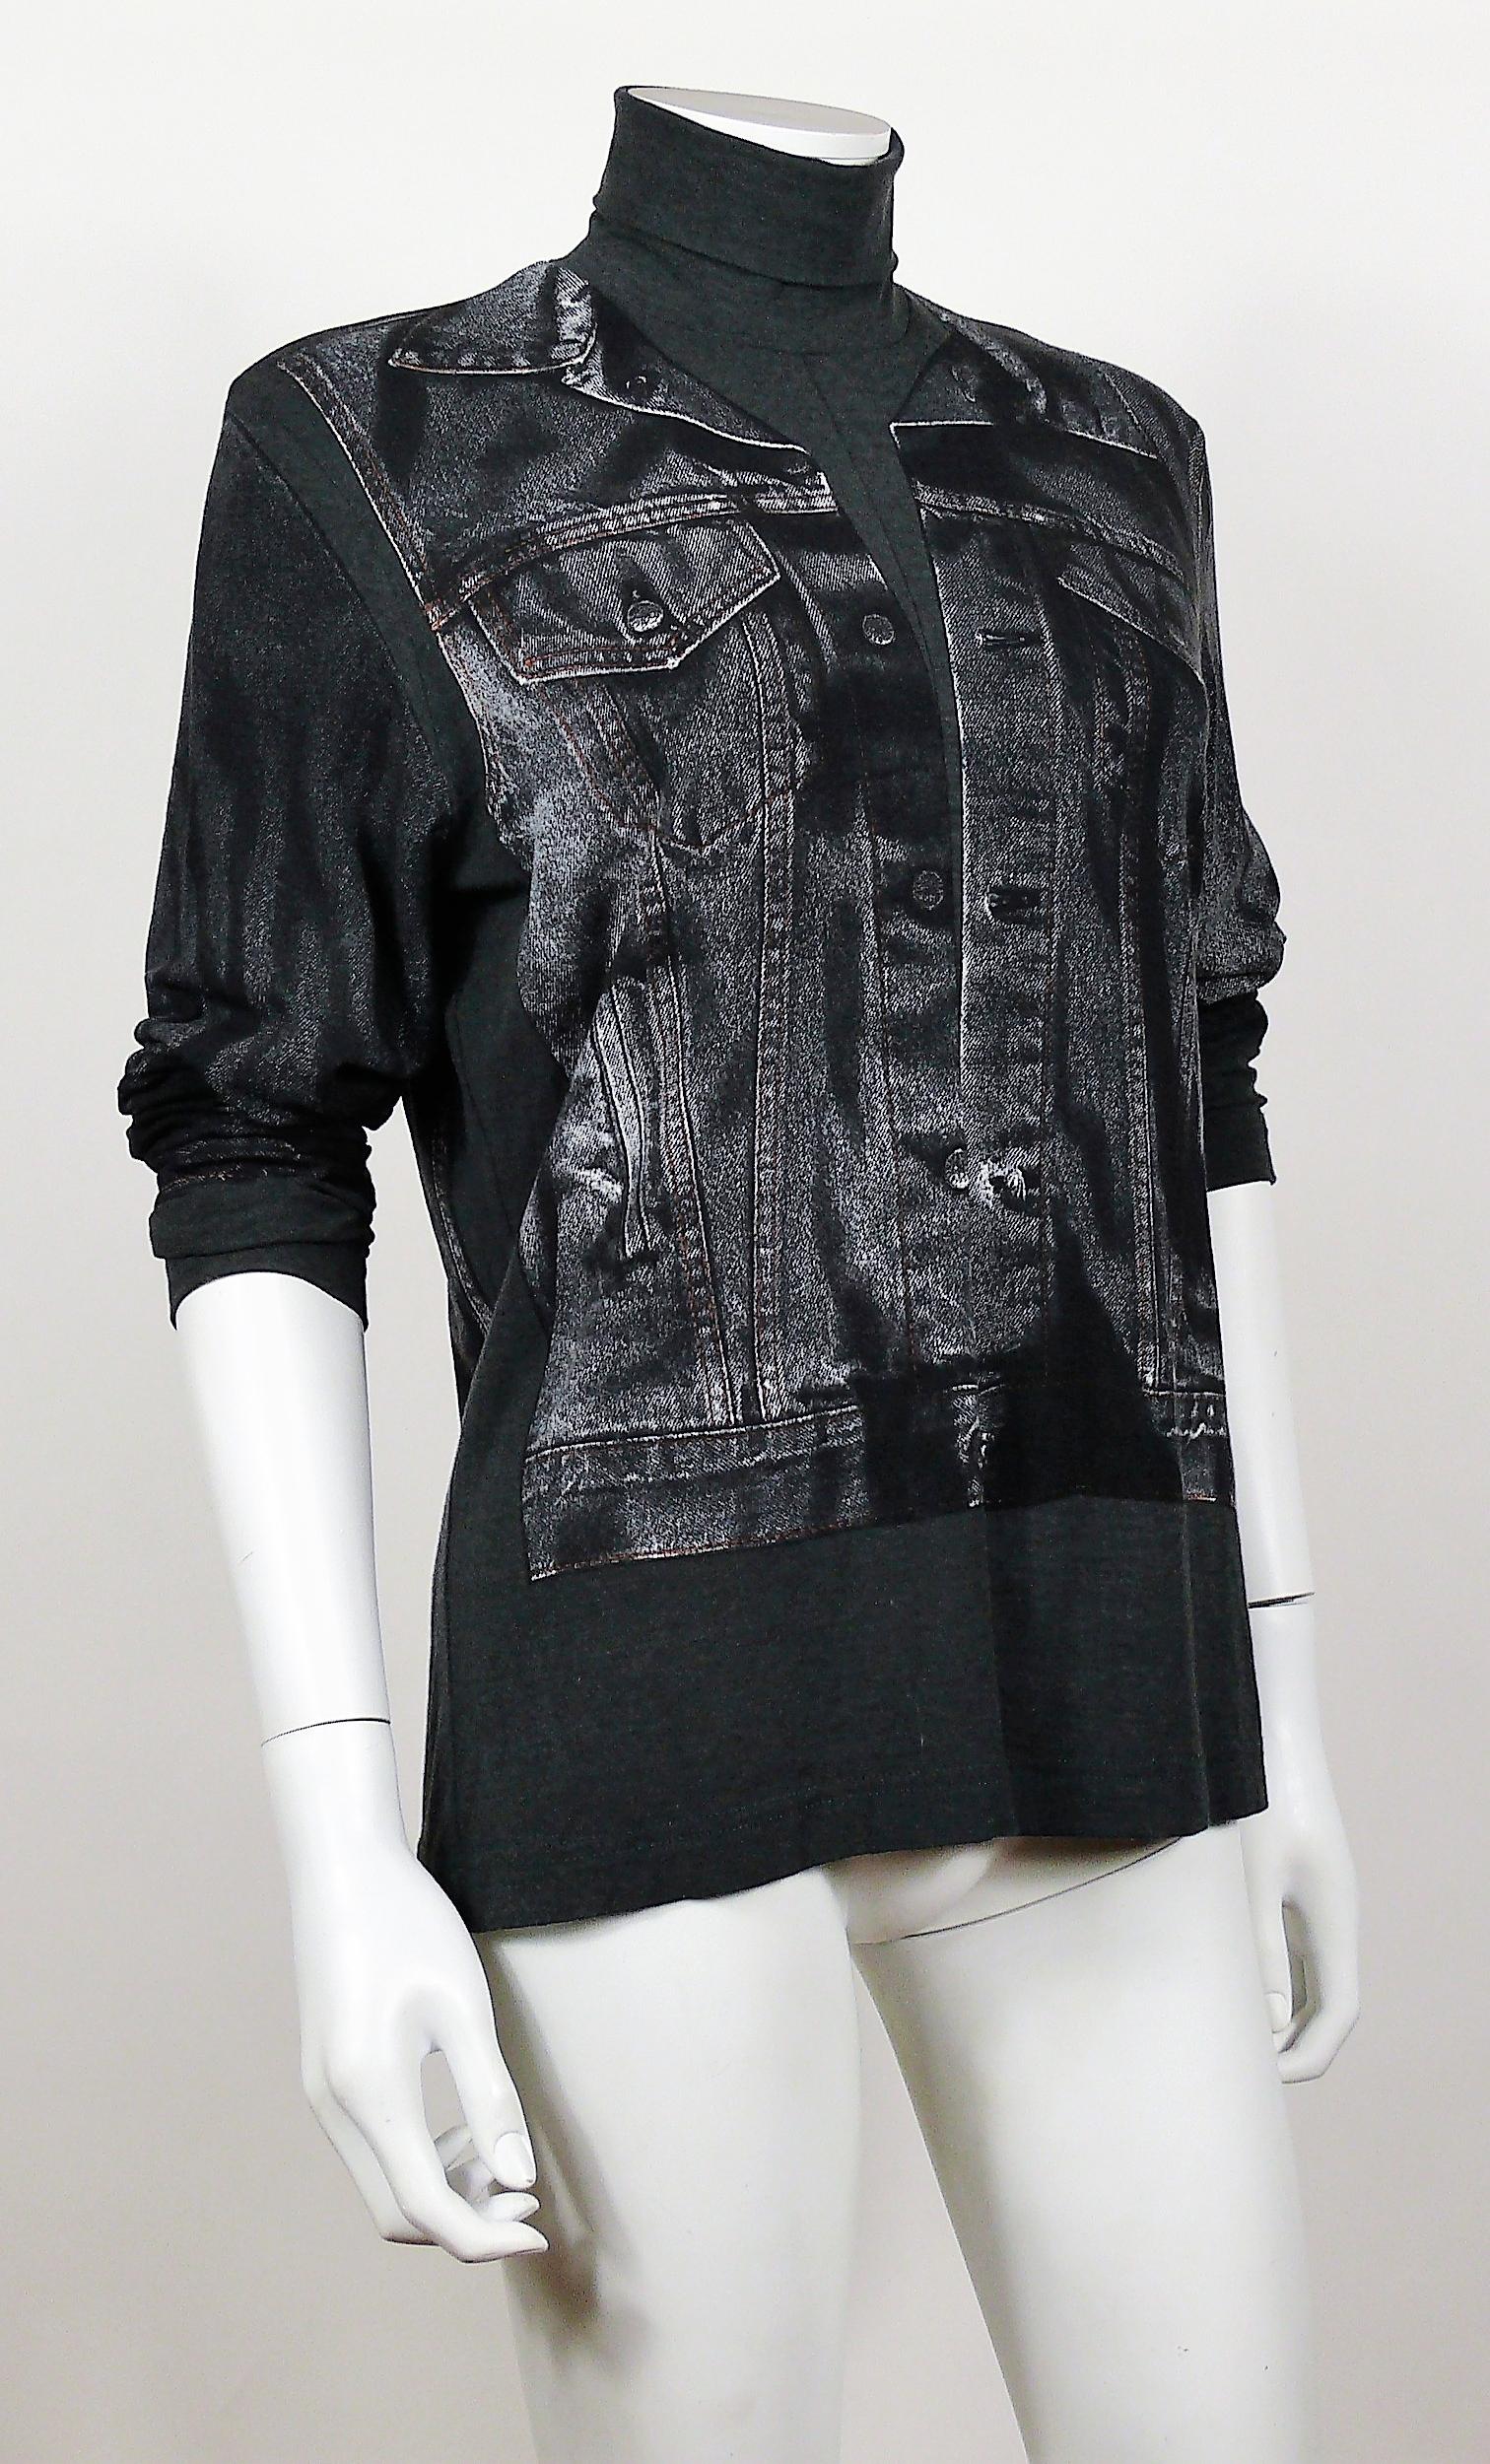 JEAN PAUL GAULTIER vintage top featuring an x-ray screen trompe l’œil jean jacket on front and back.

This top features :
- Dark grey jersey background featuring distressed black/white x-ray screen trompe l’œil jean jacket print.
- Stretchy